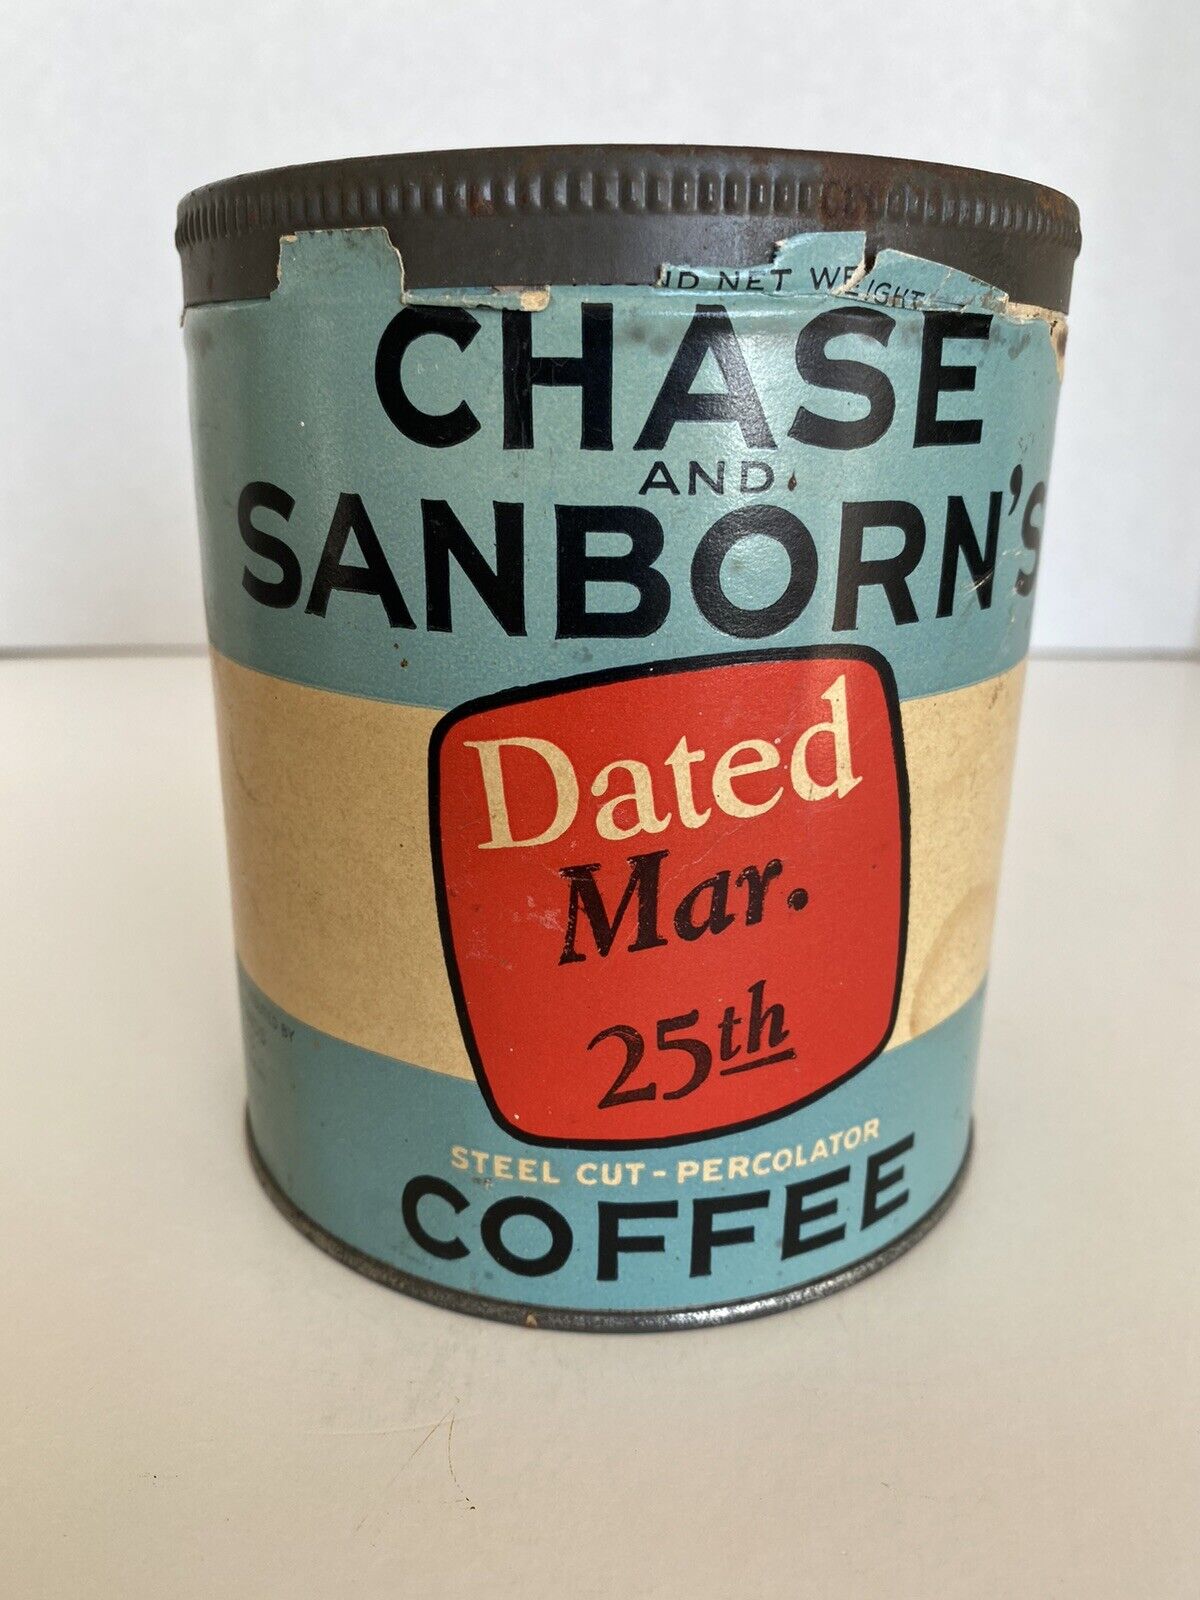 Vintage Chase & Sanborn\'s Coffee Tin Can, Dated March 25th, Standard Brands, NY